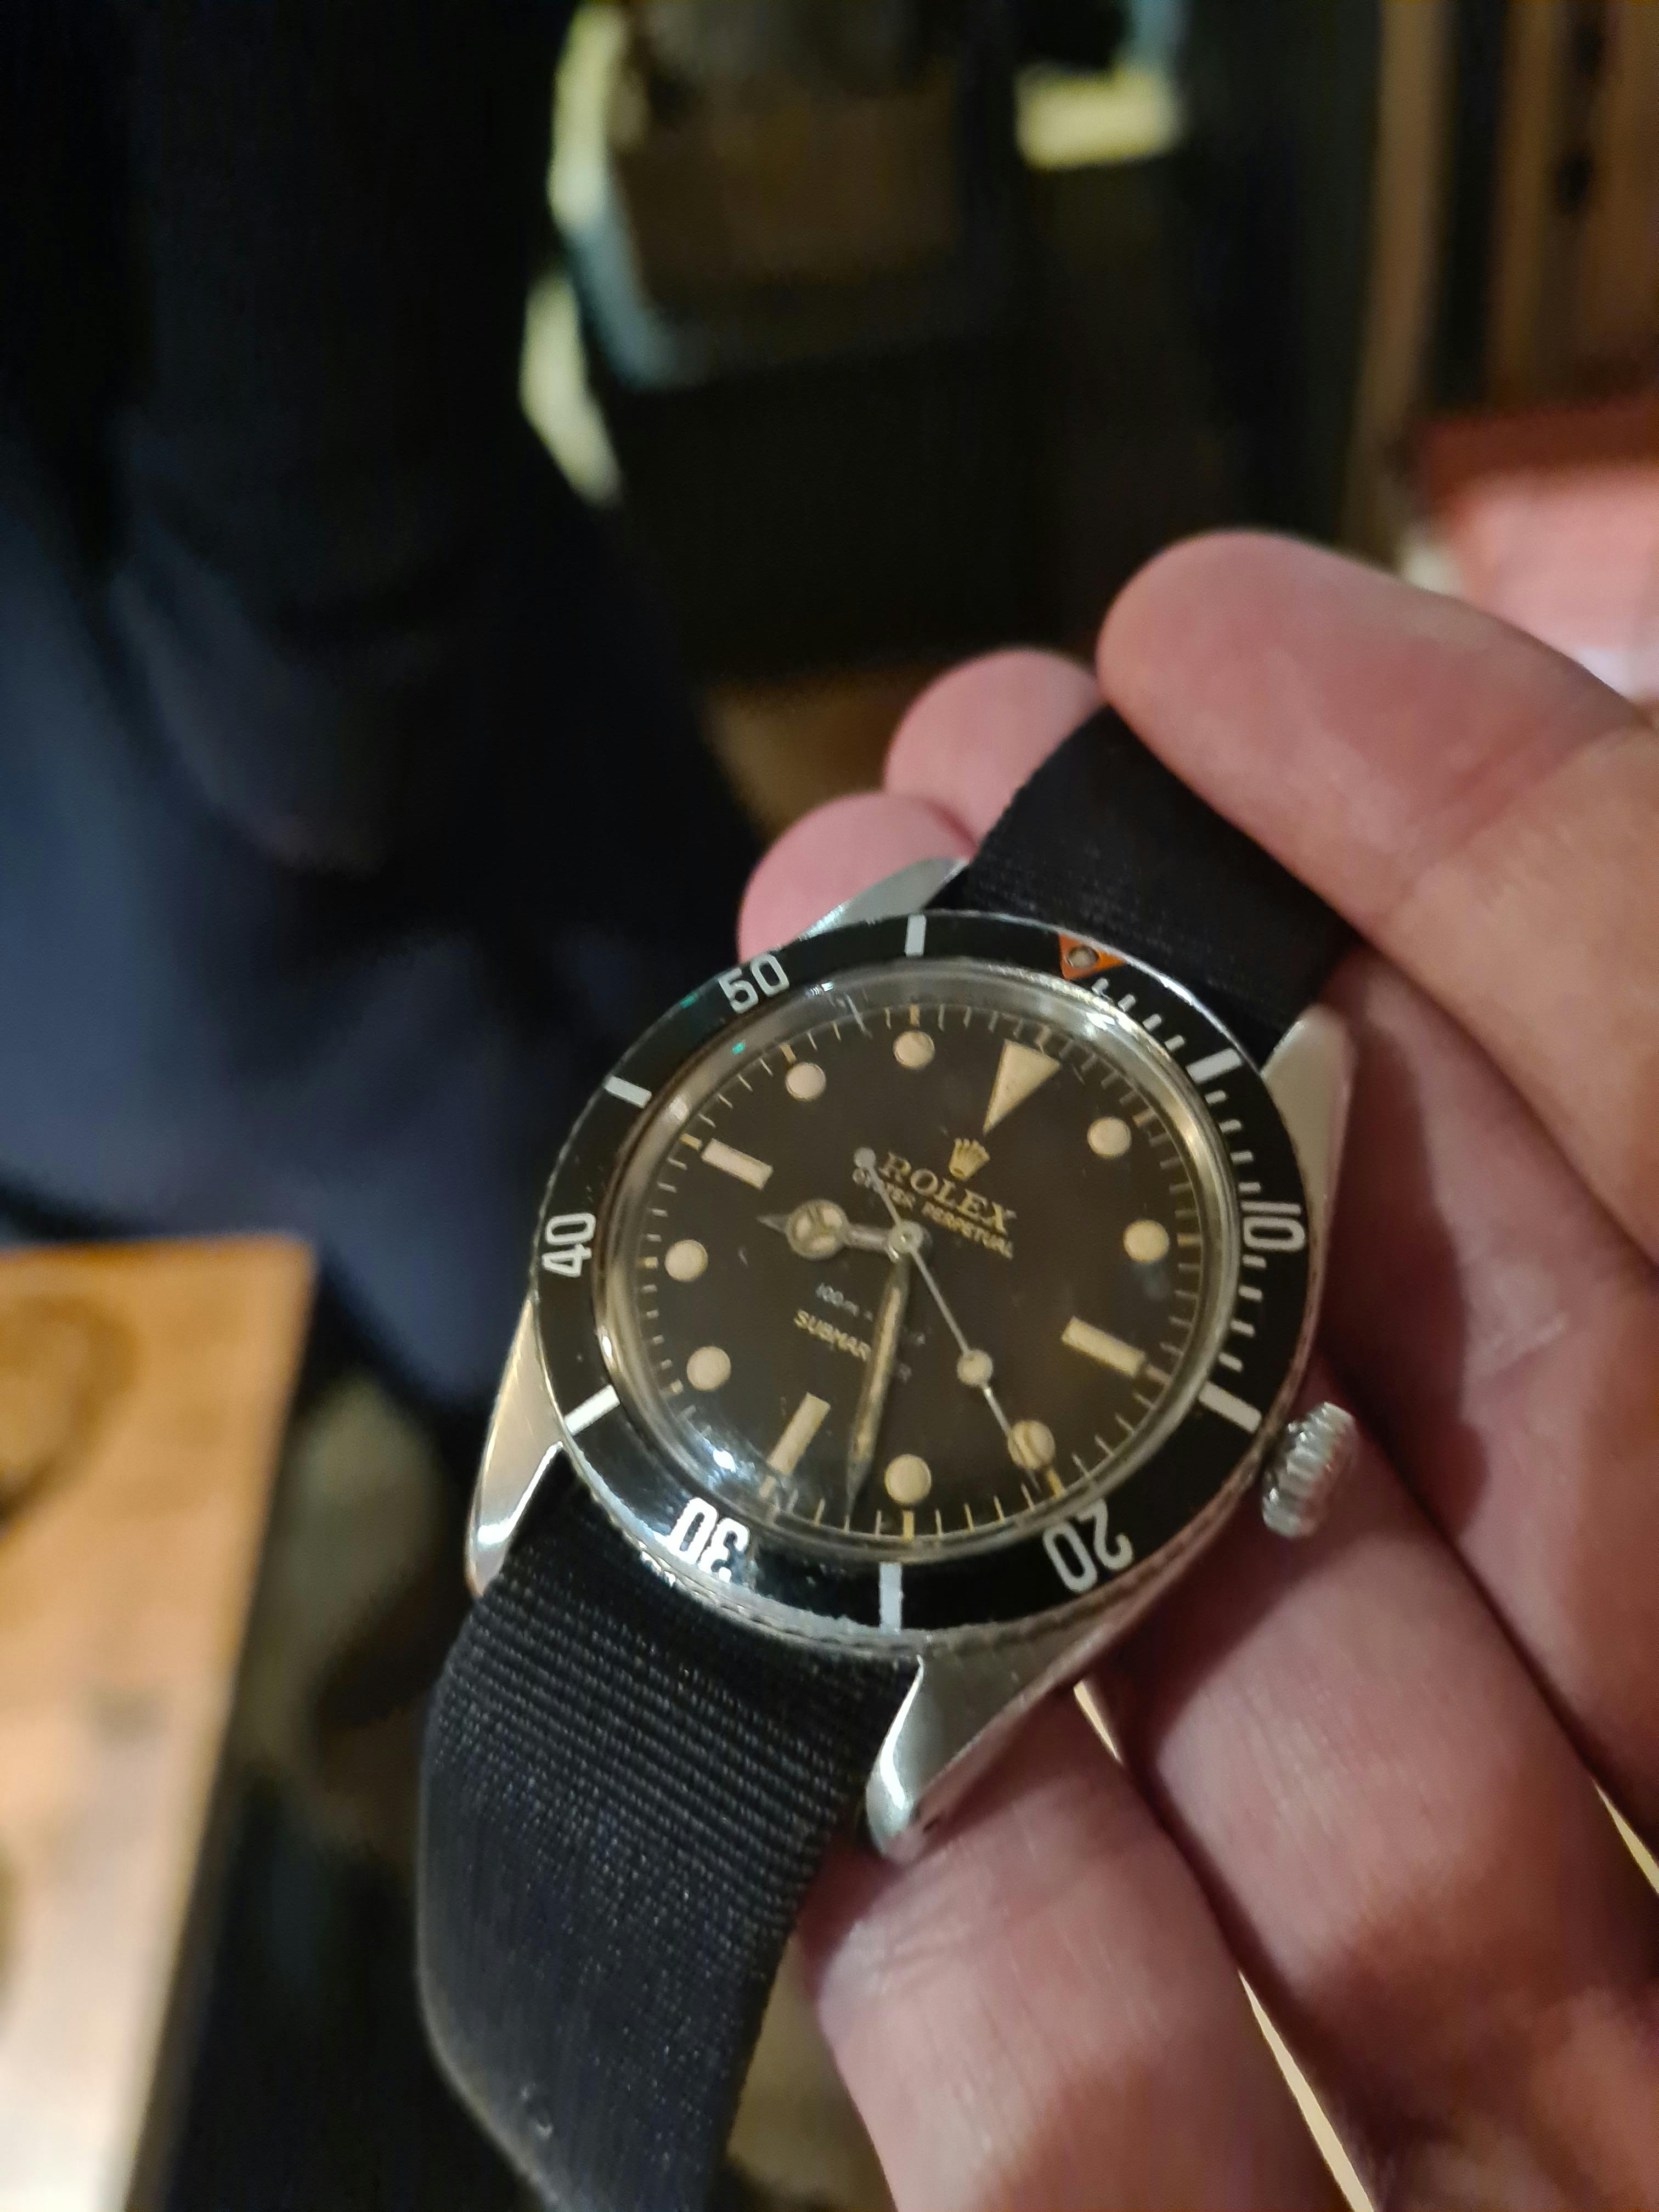 A Rolex Submariner from 1953, the year the watch was released.